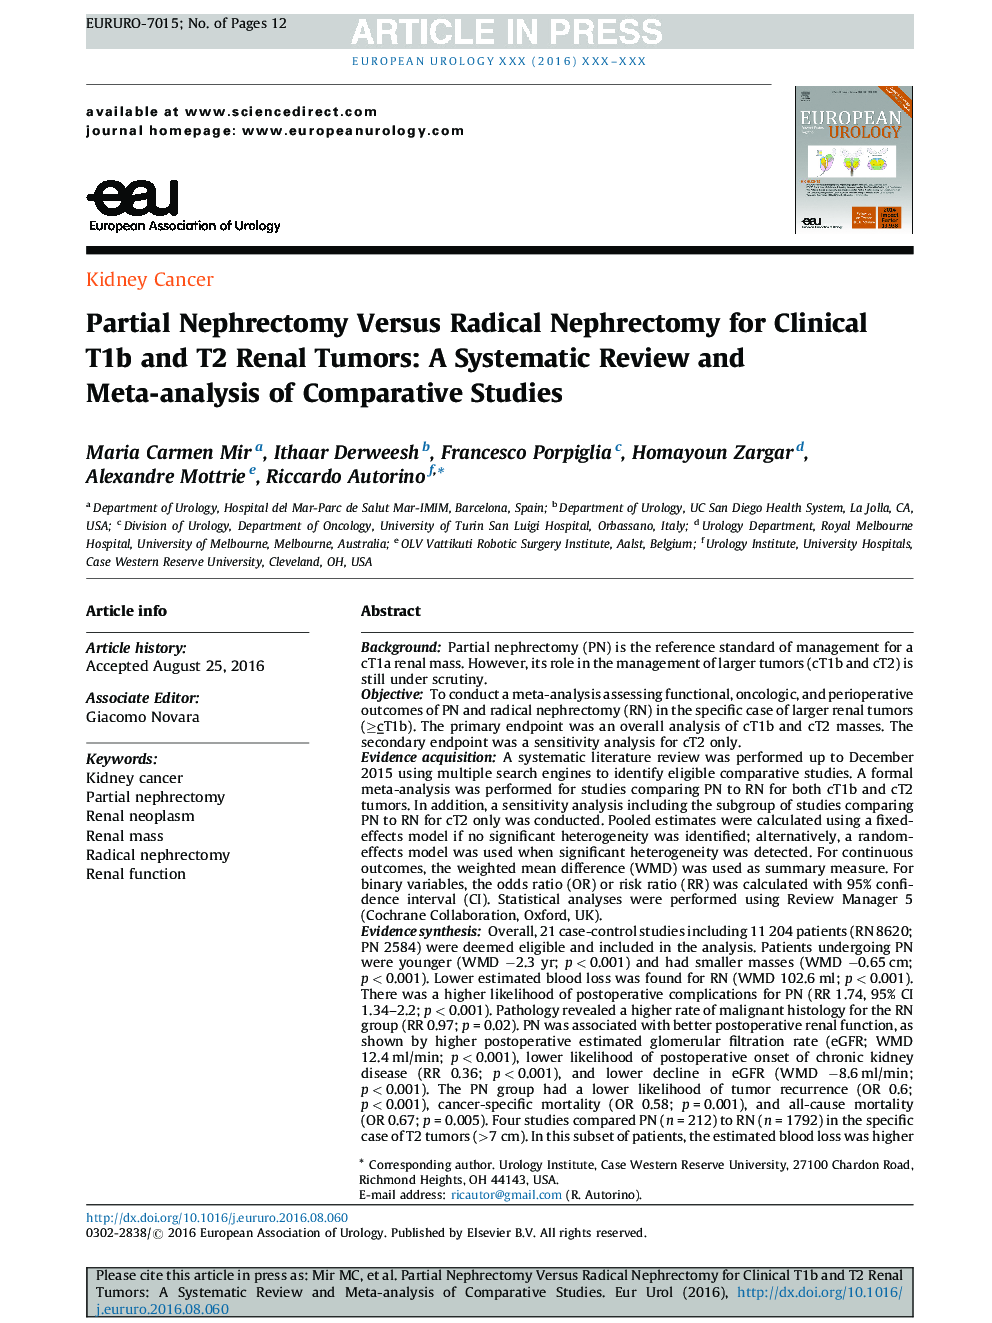 Partial Nephrectomy Versus Radical Nephrectomy for Clinical T1b and T2 Renal Tumors: A Systematic Review and Meta-analysis of Comparative Studies